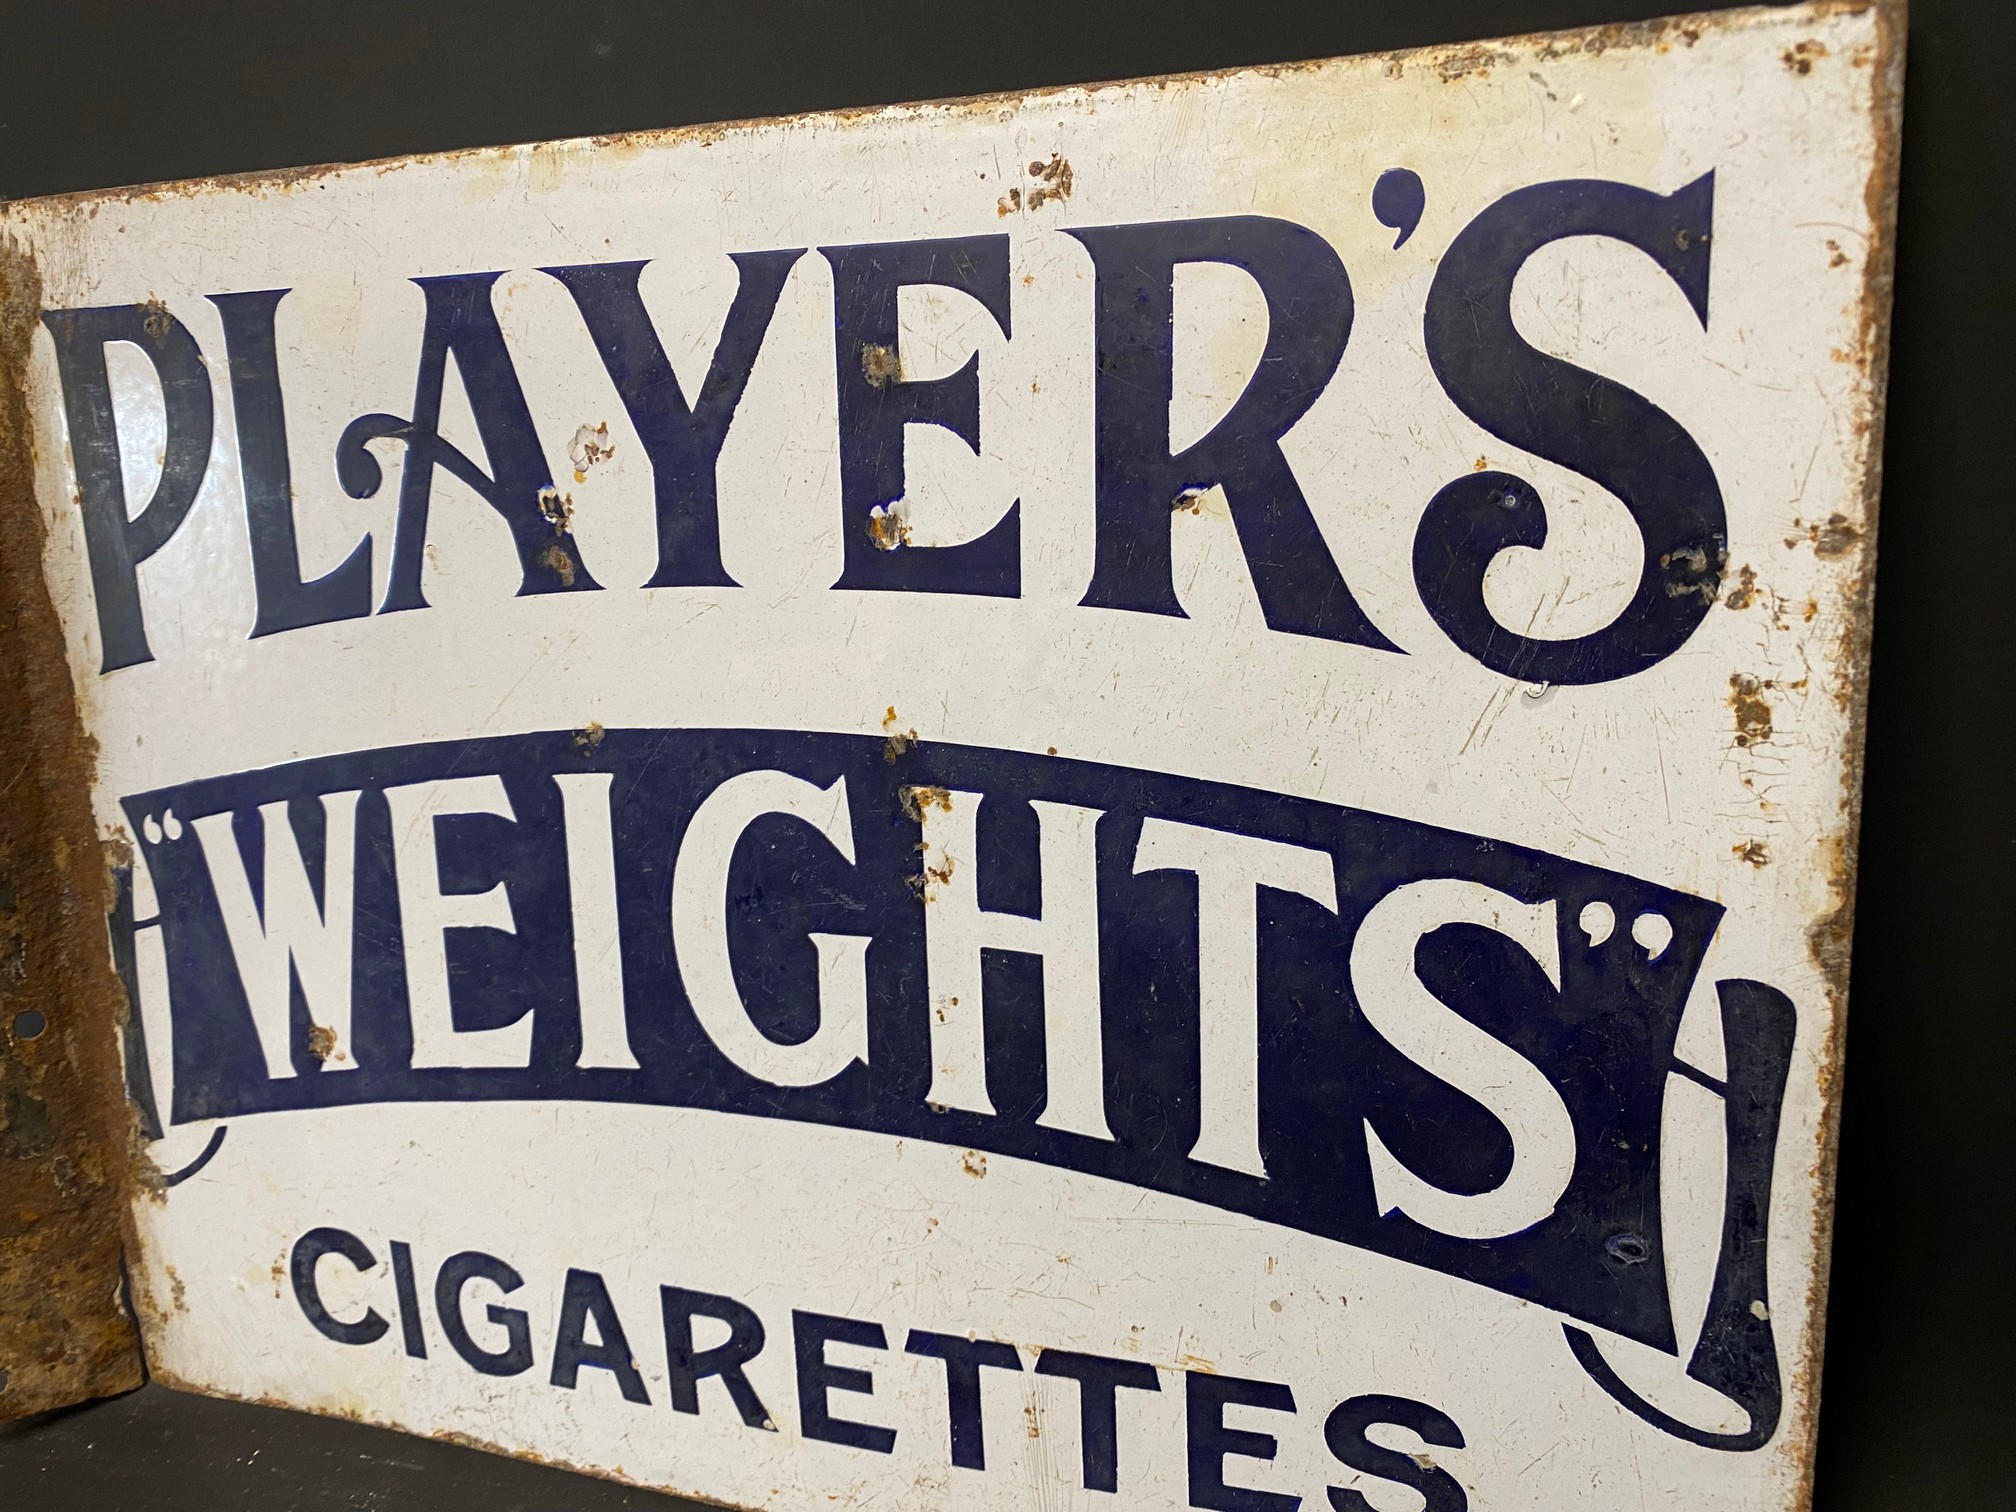 An early Player's Weights Cigarettes double sided enamel sign with hanging flange, by Wildman & - Image 3 of 6